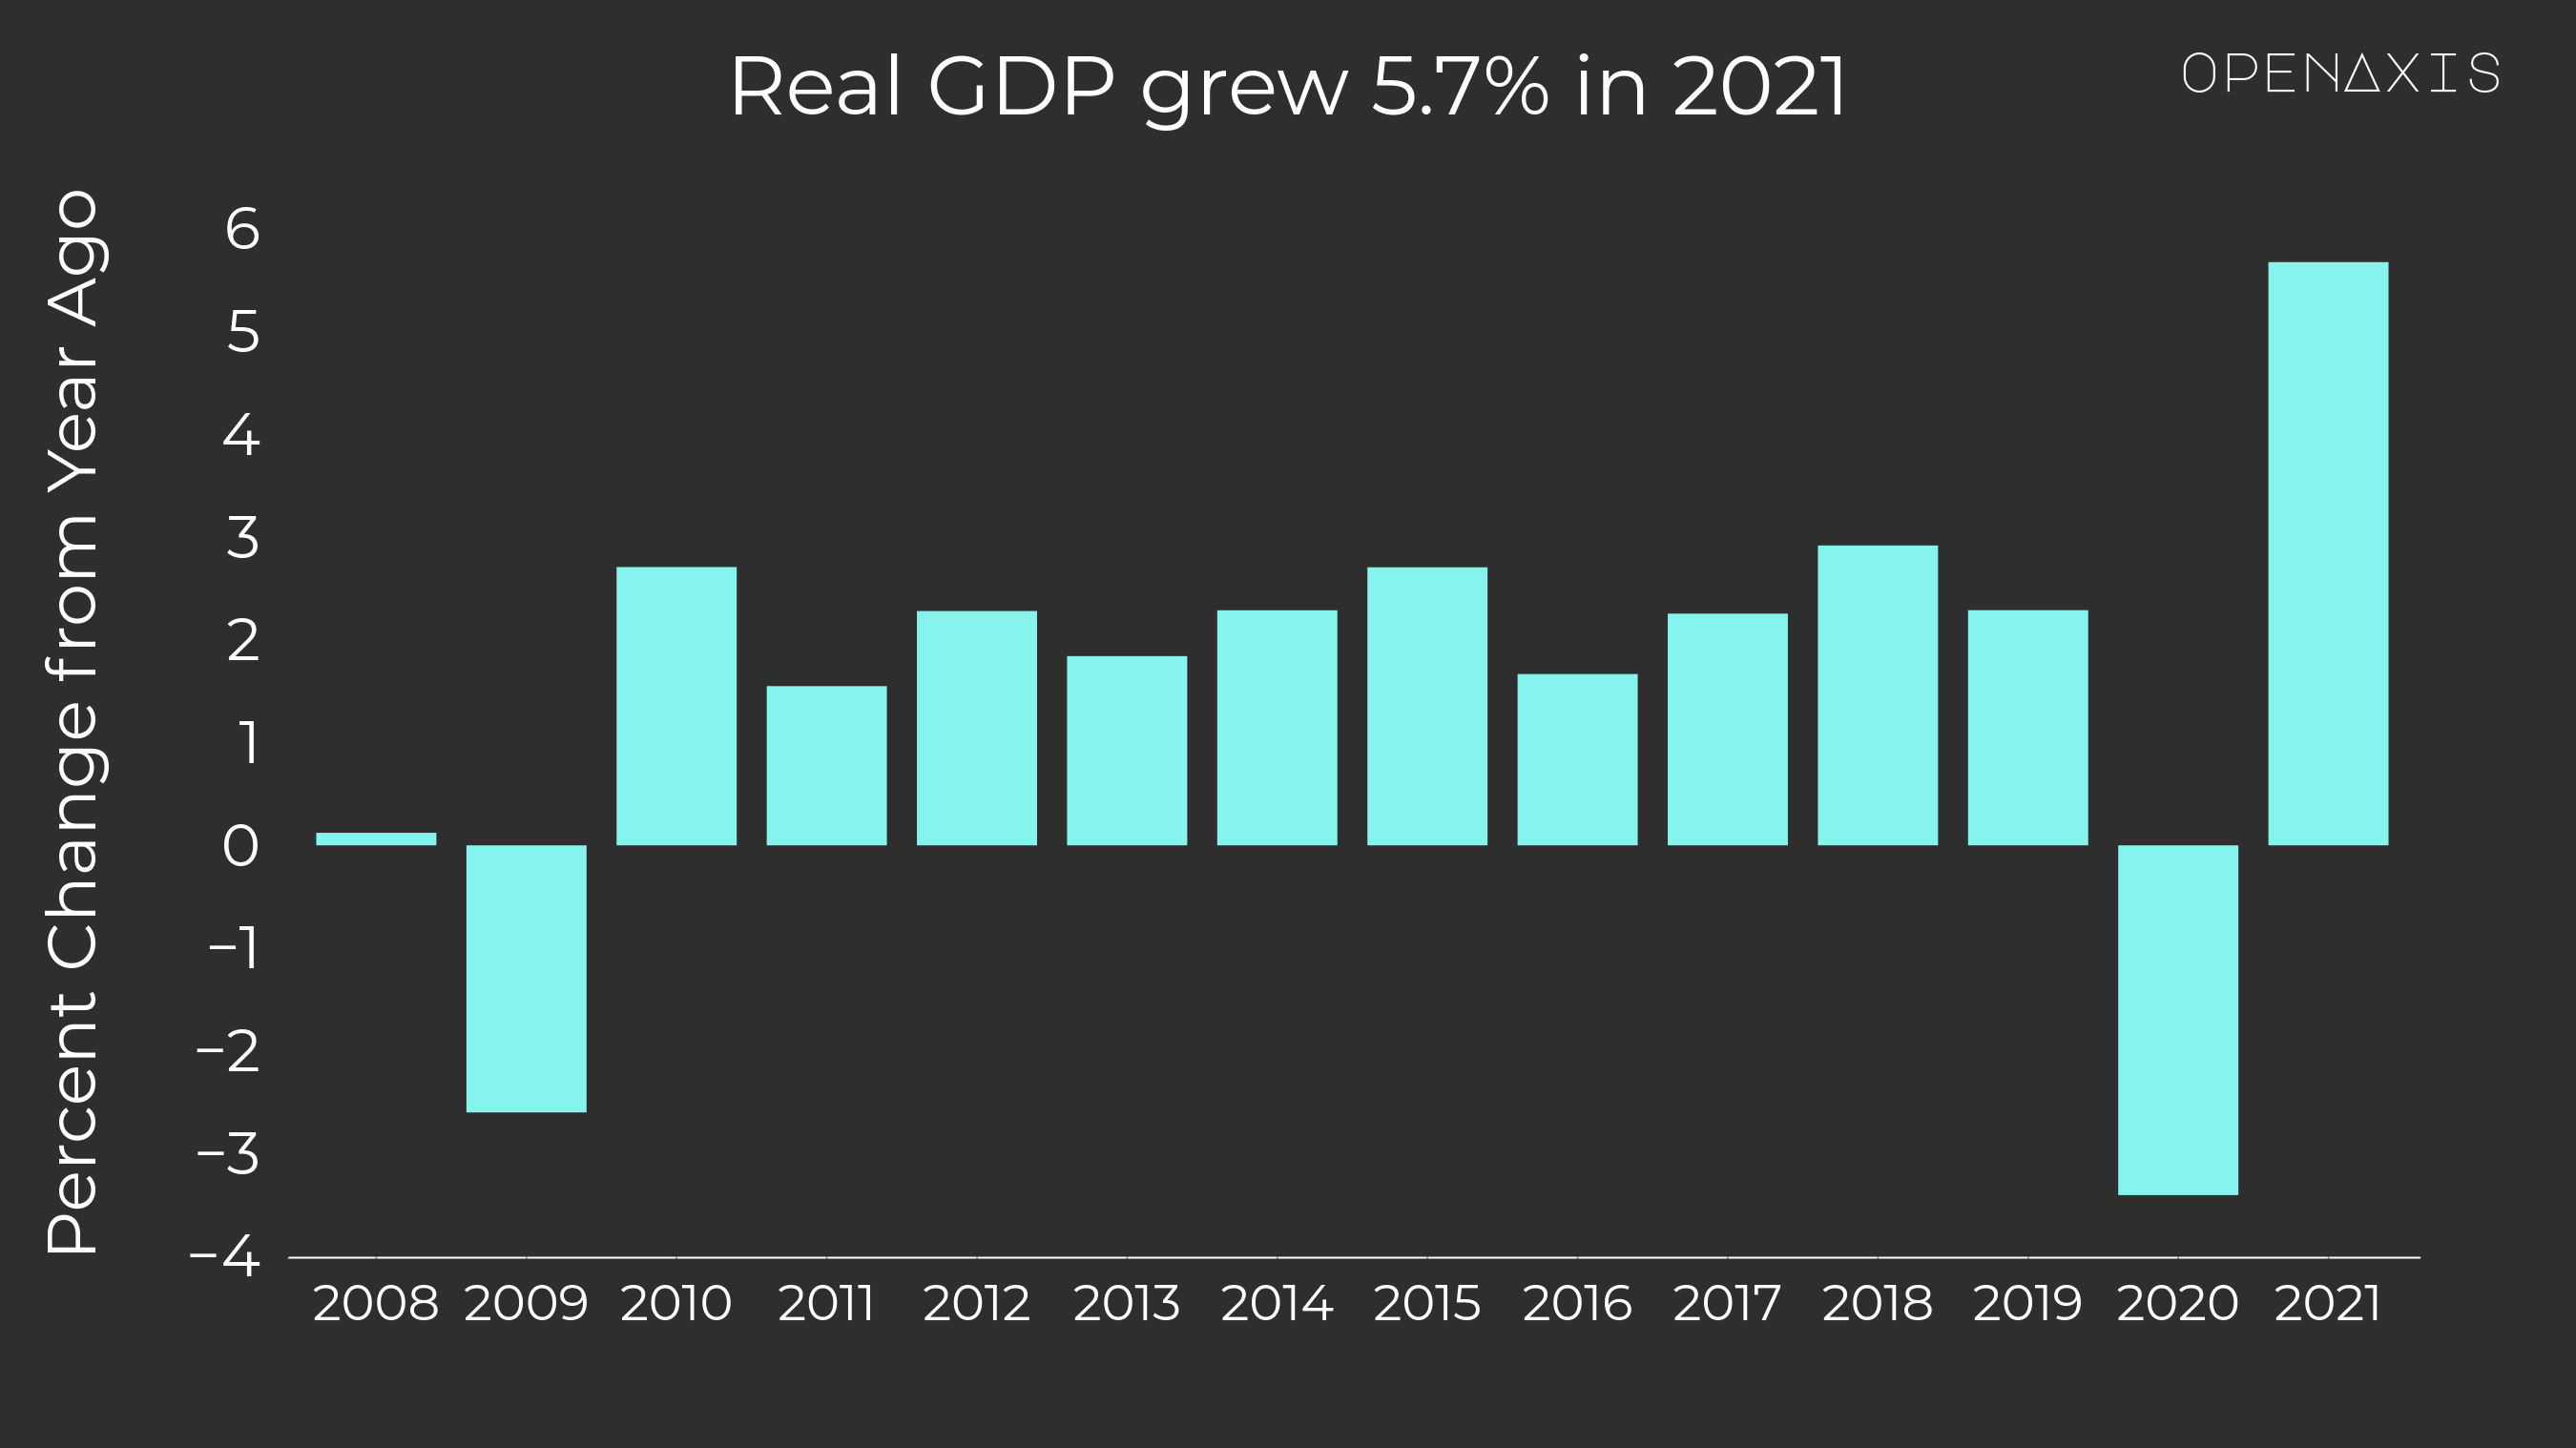 <p>Real GDP grew 5.7% in 2021 after decreasing 3.4% in 2020.</p><p><a href="https://app.openaxis.com/projects/openaxis/State-of-the-Union-2022" target="_blank">Return to State of the Union 2022 project by OpenAxis</a></p><p><br /></p><p>﻿<a href="/search?q=%23sotu" target="_self">#sotu</a>﻿ ﻿<a href="/search?q=%23fred" target="_self">#fred</a>﻿ ﻿<a href="/search?q=%23gdp" target="_self">#gdp</a>﻿ ﻿<a href="/search?q=%23economy" target="_self">#economy</a>﻿ </p>